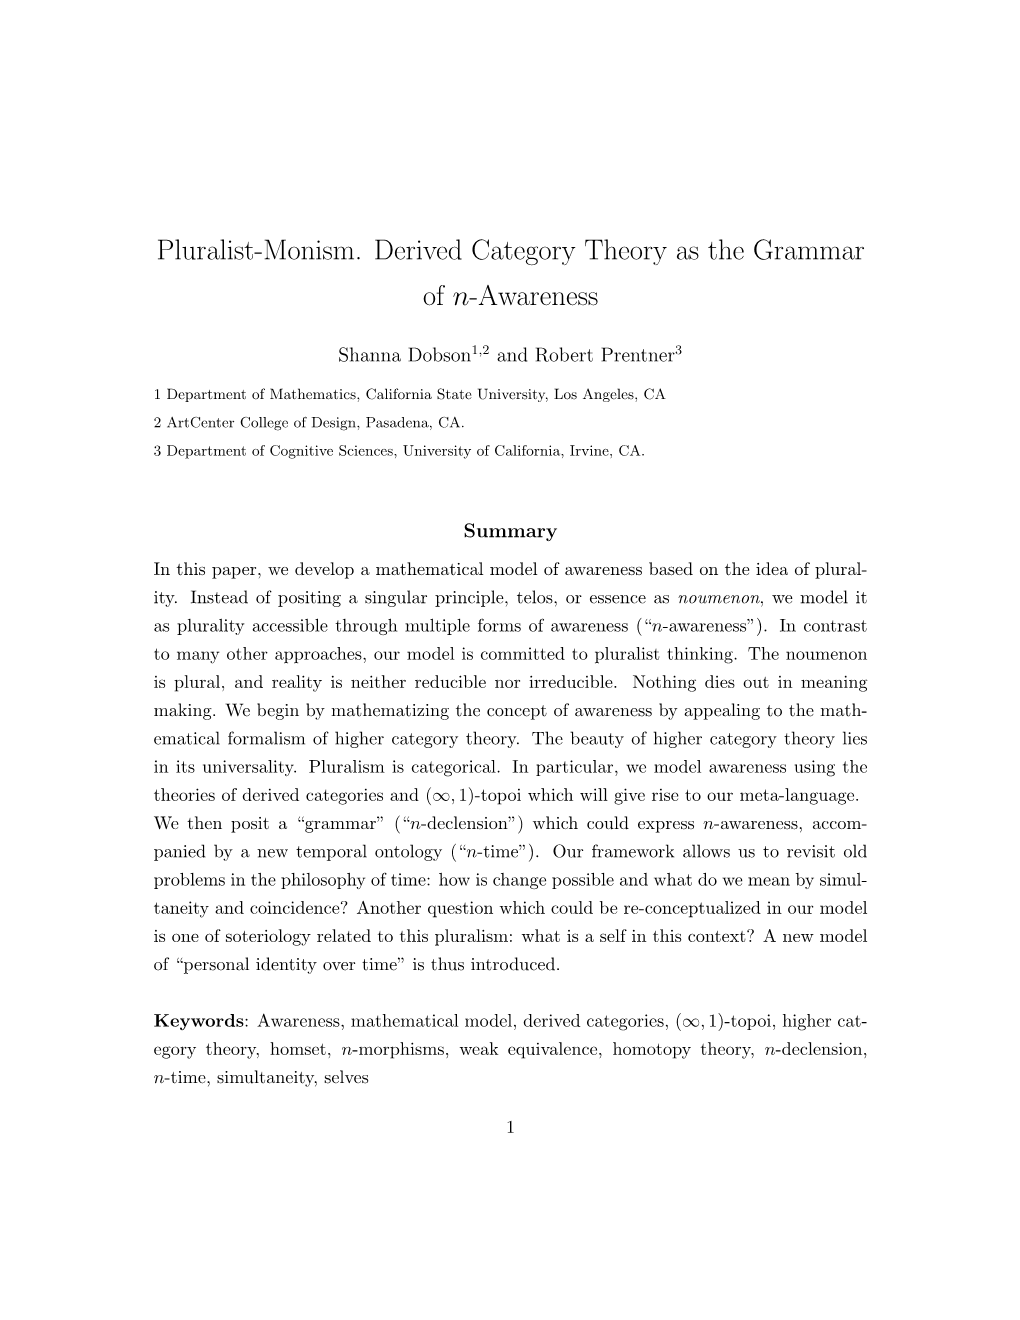 Pluralist-Monism. Derived Category Theory As the Grammar of N-Awareness